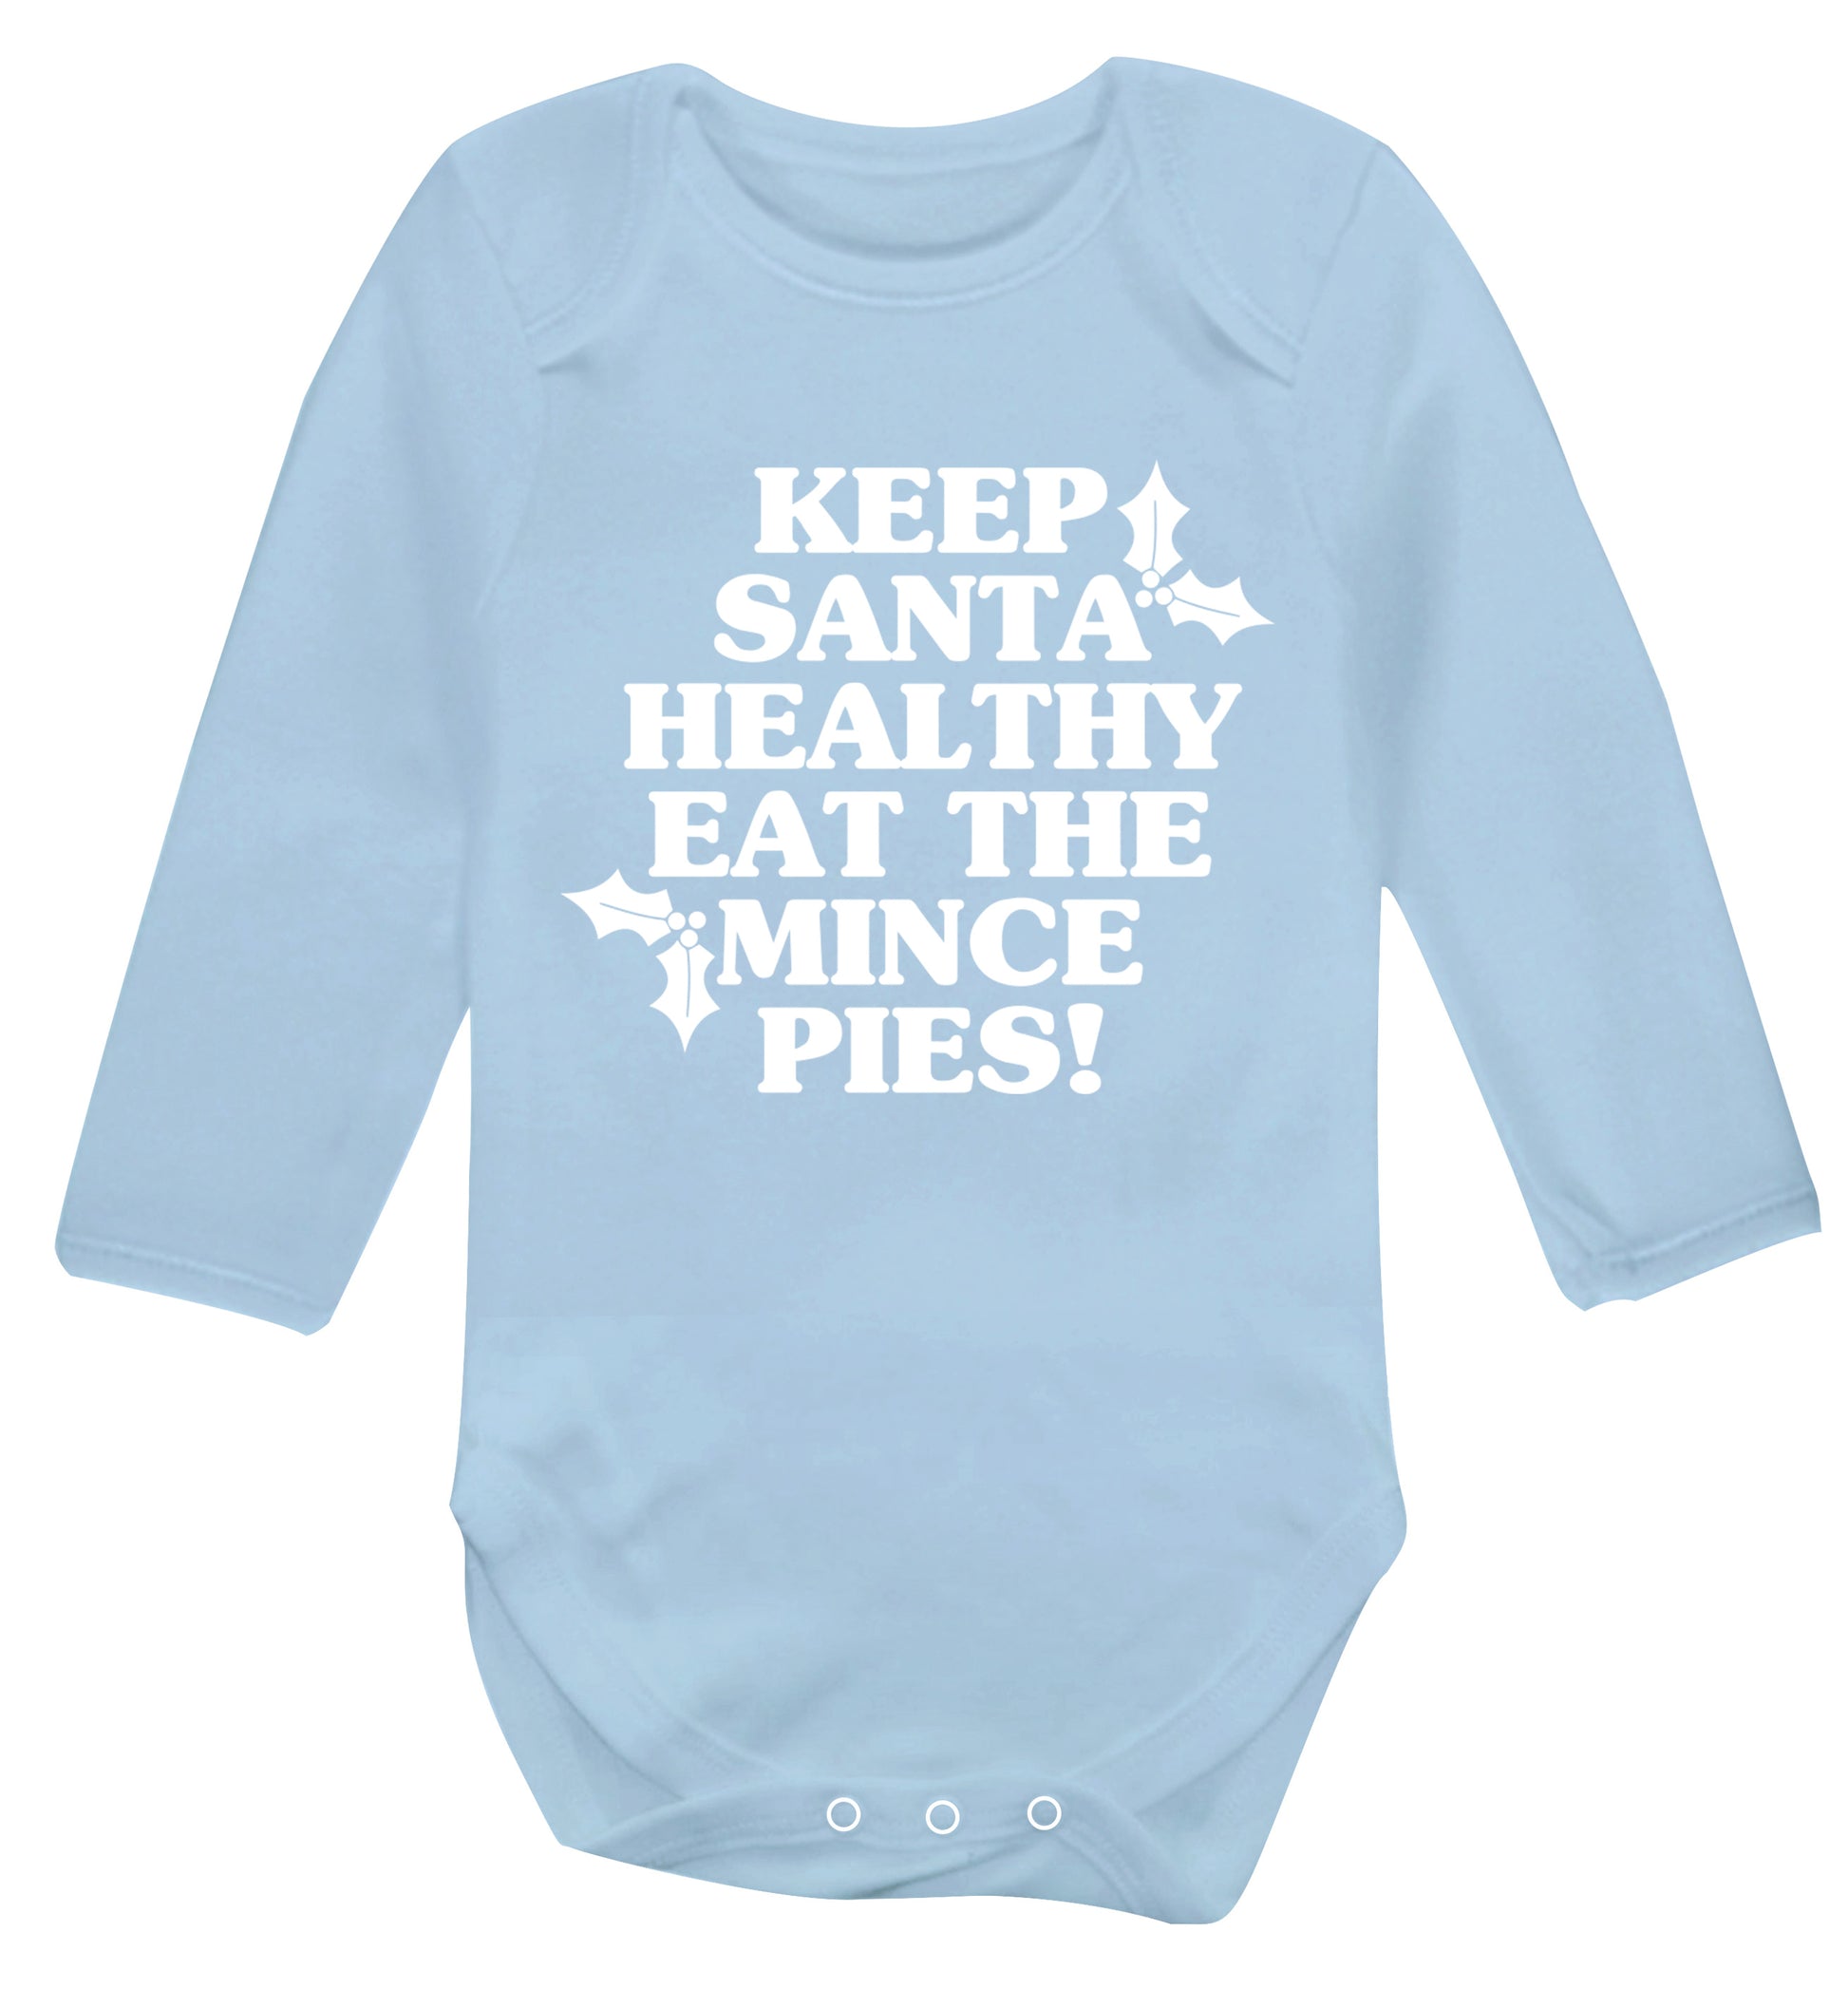 Keep santa healthy eat the mince pies Baby Vest long sleeved pale blue 6-12 months